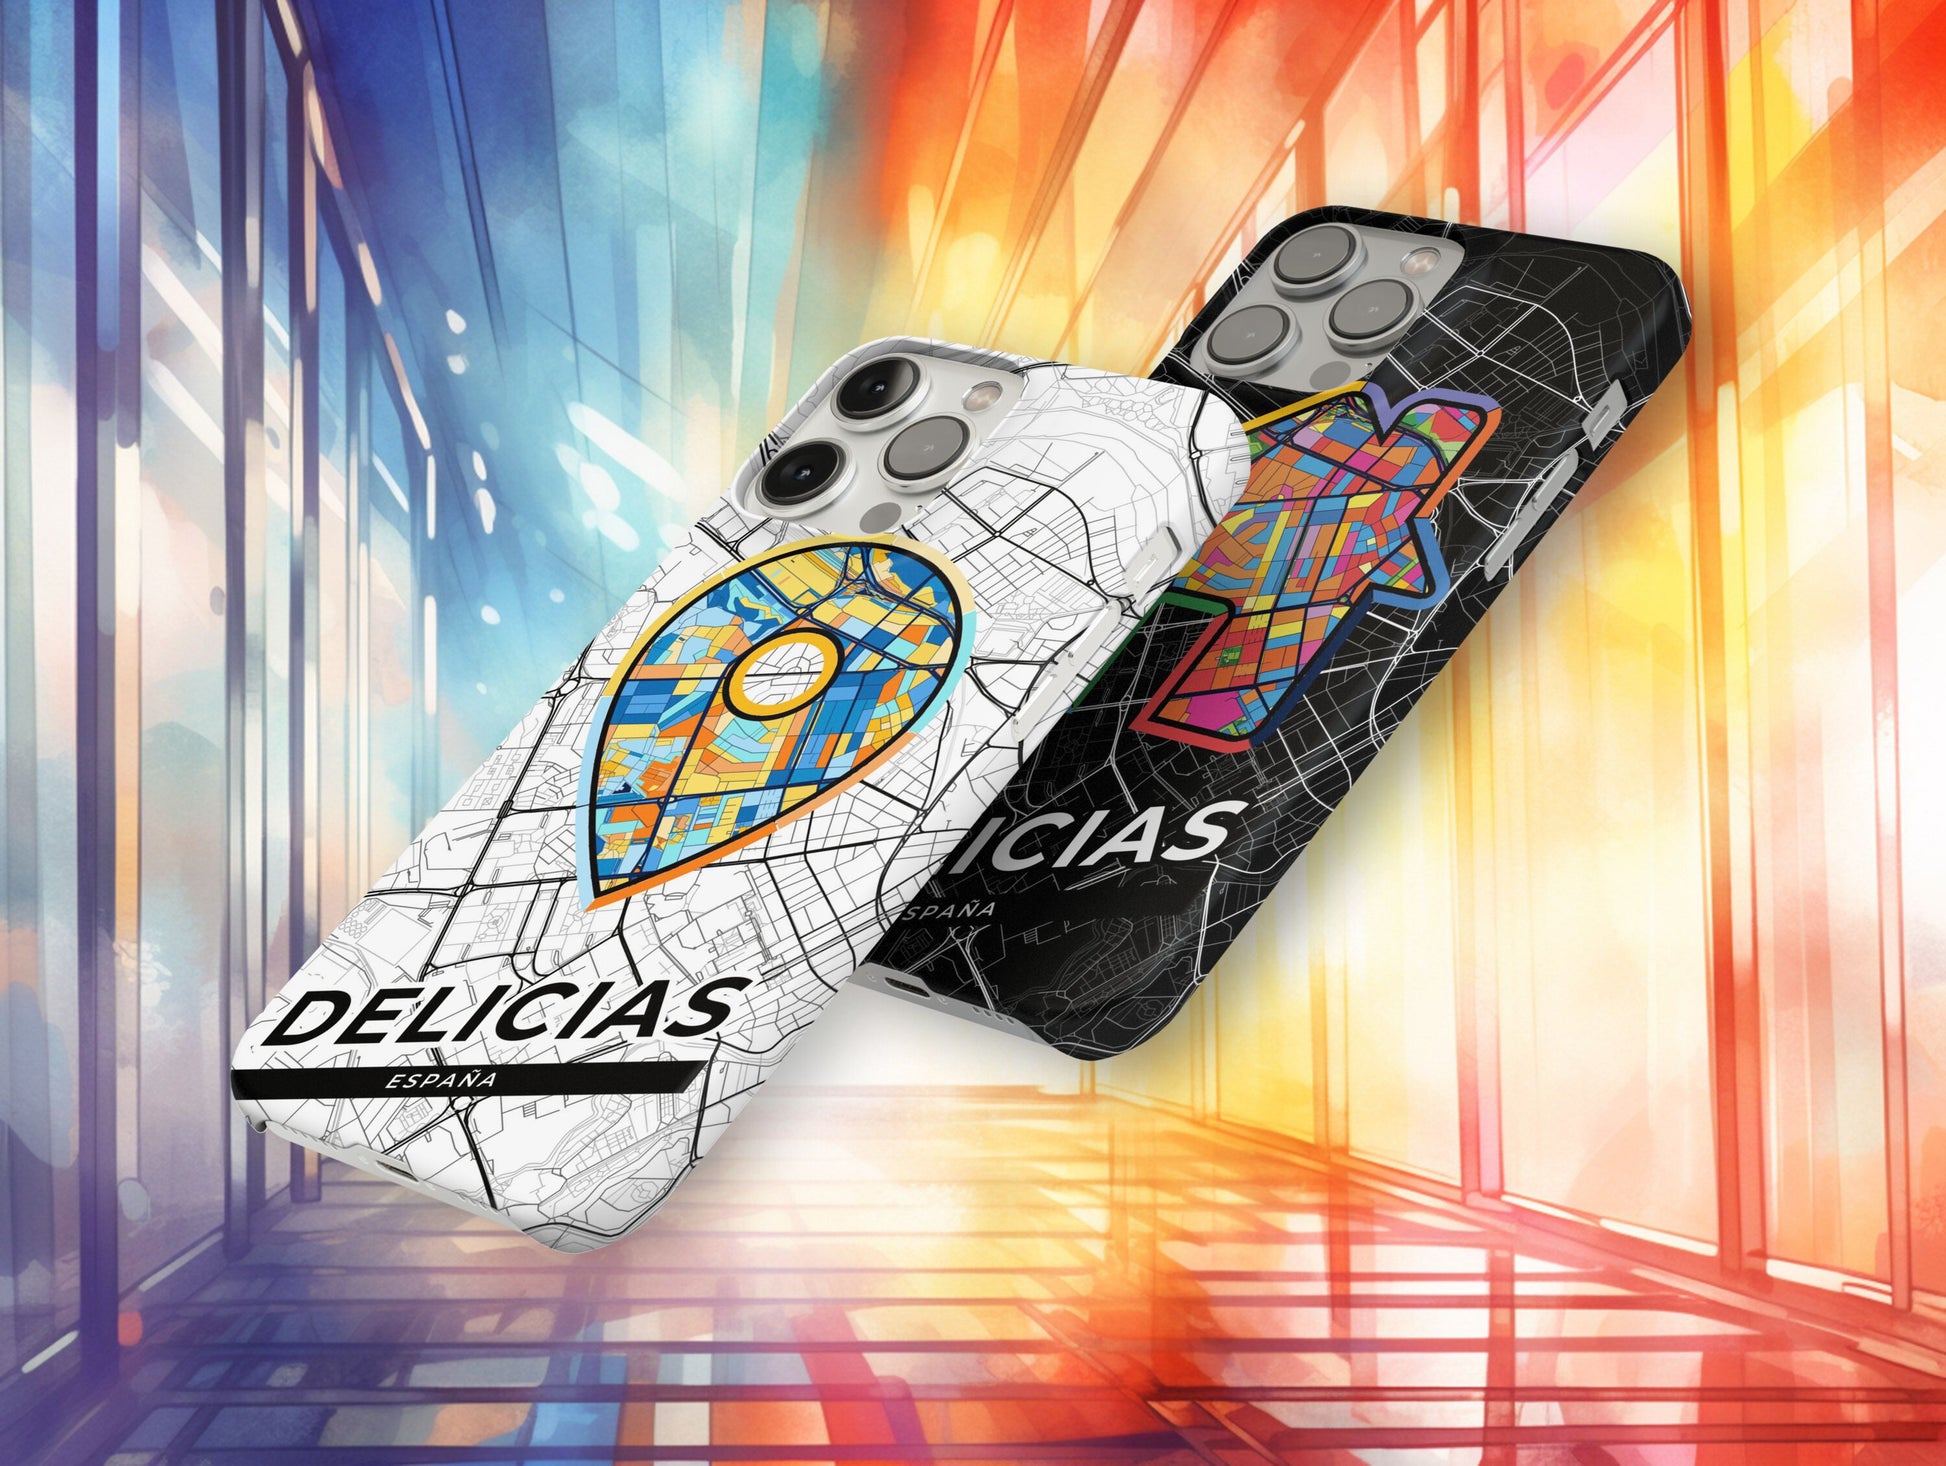 Delicias Spain slim phone case with colorful icon. Birthday, wedding or housewarming gift. Couple match cases.